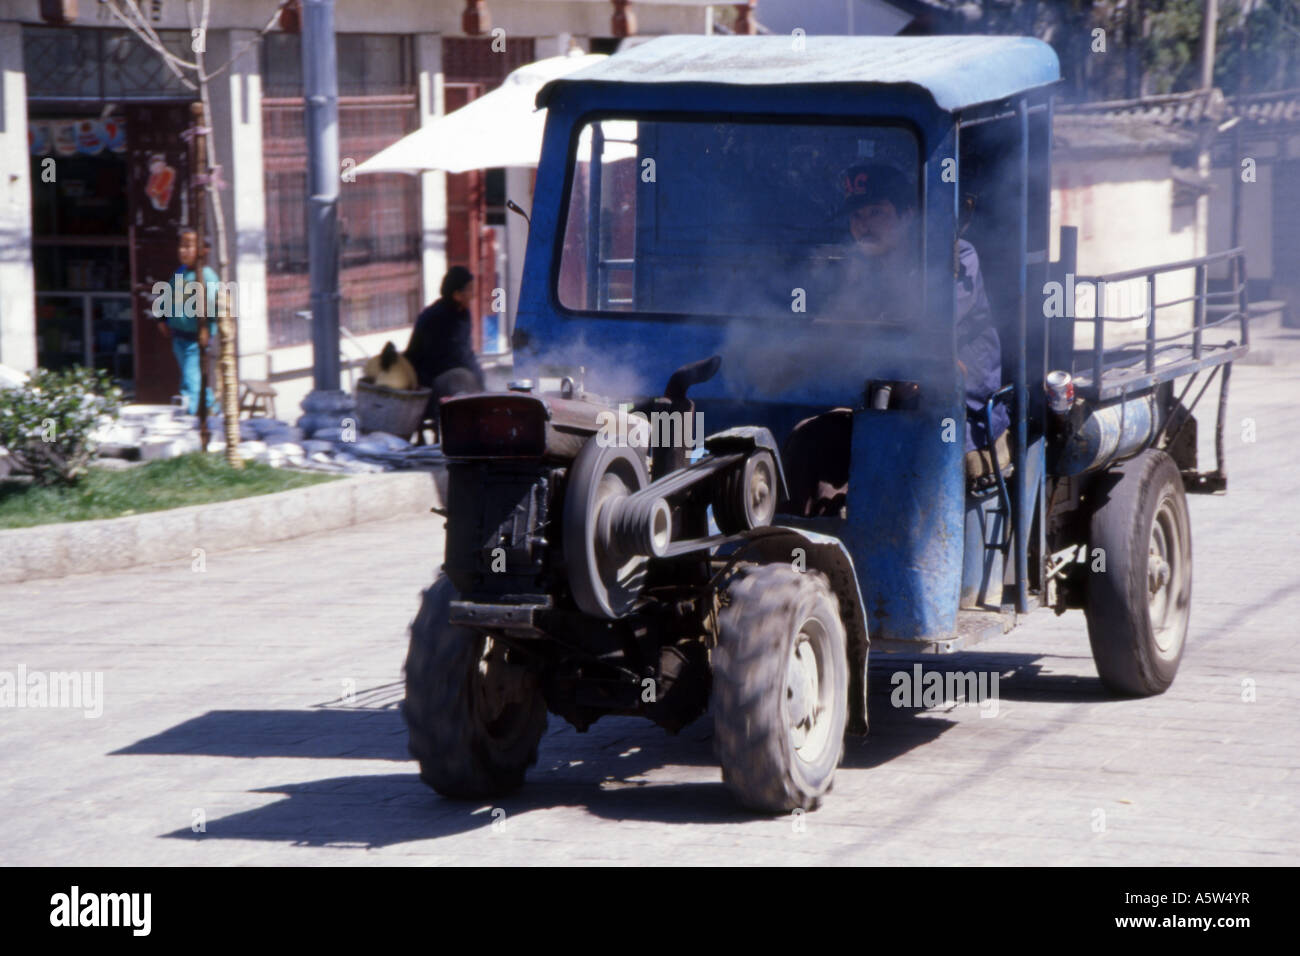 Typical rural transport,truck with open engine at front belching fumes,Dali,Yunnan Province,China. Stock Photo